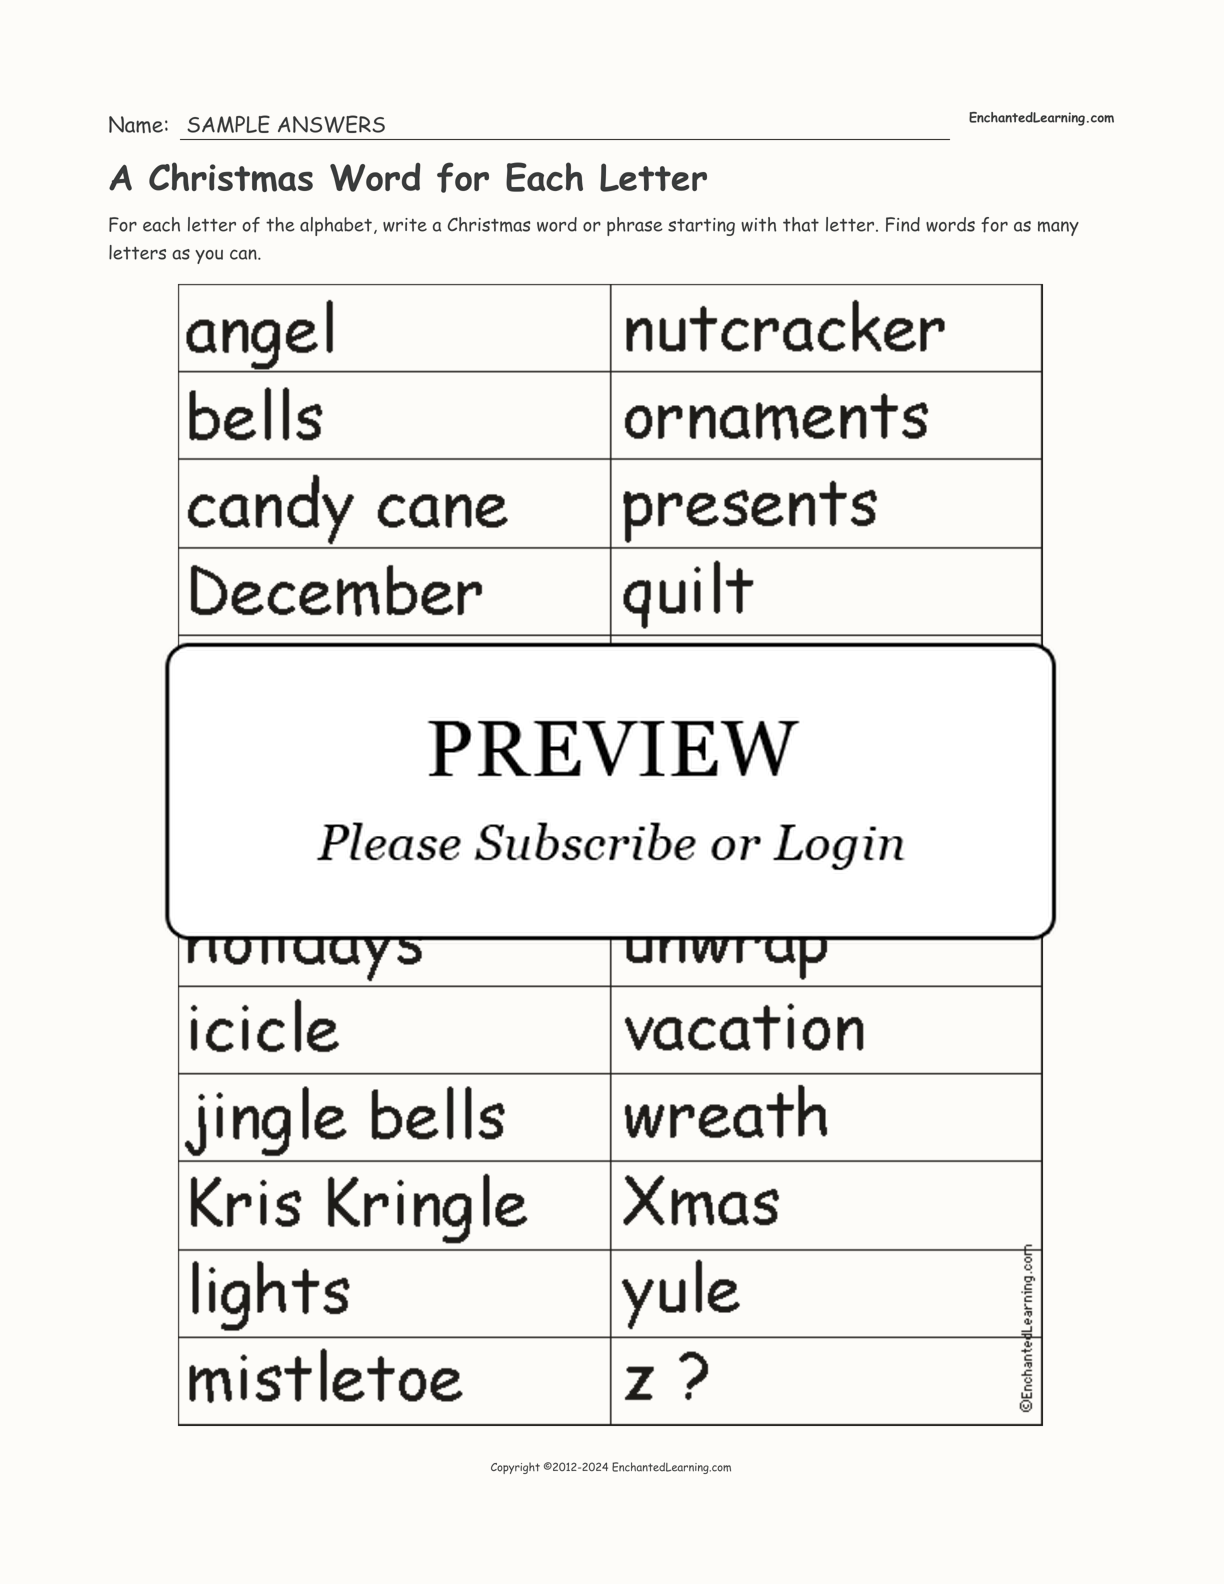 a-christmas-word-for-each-letter-enchanted-learning